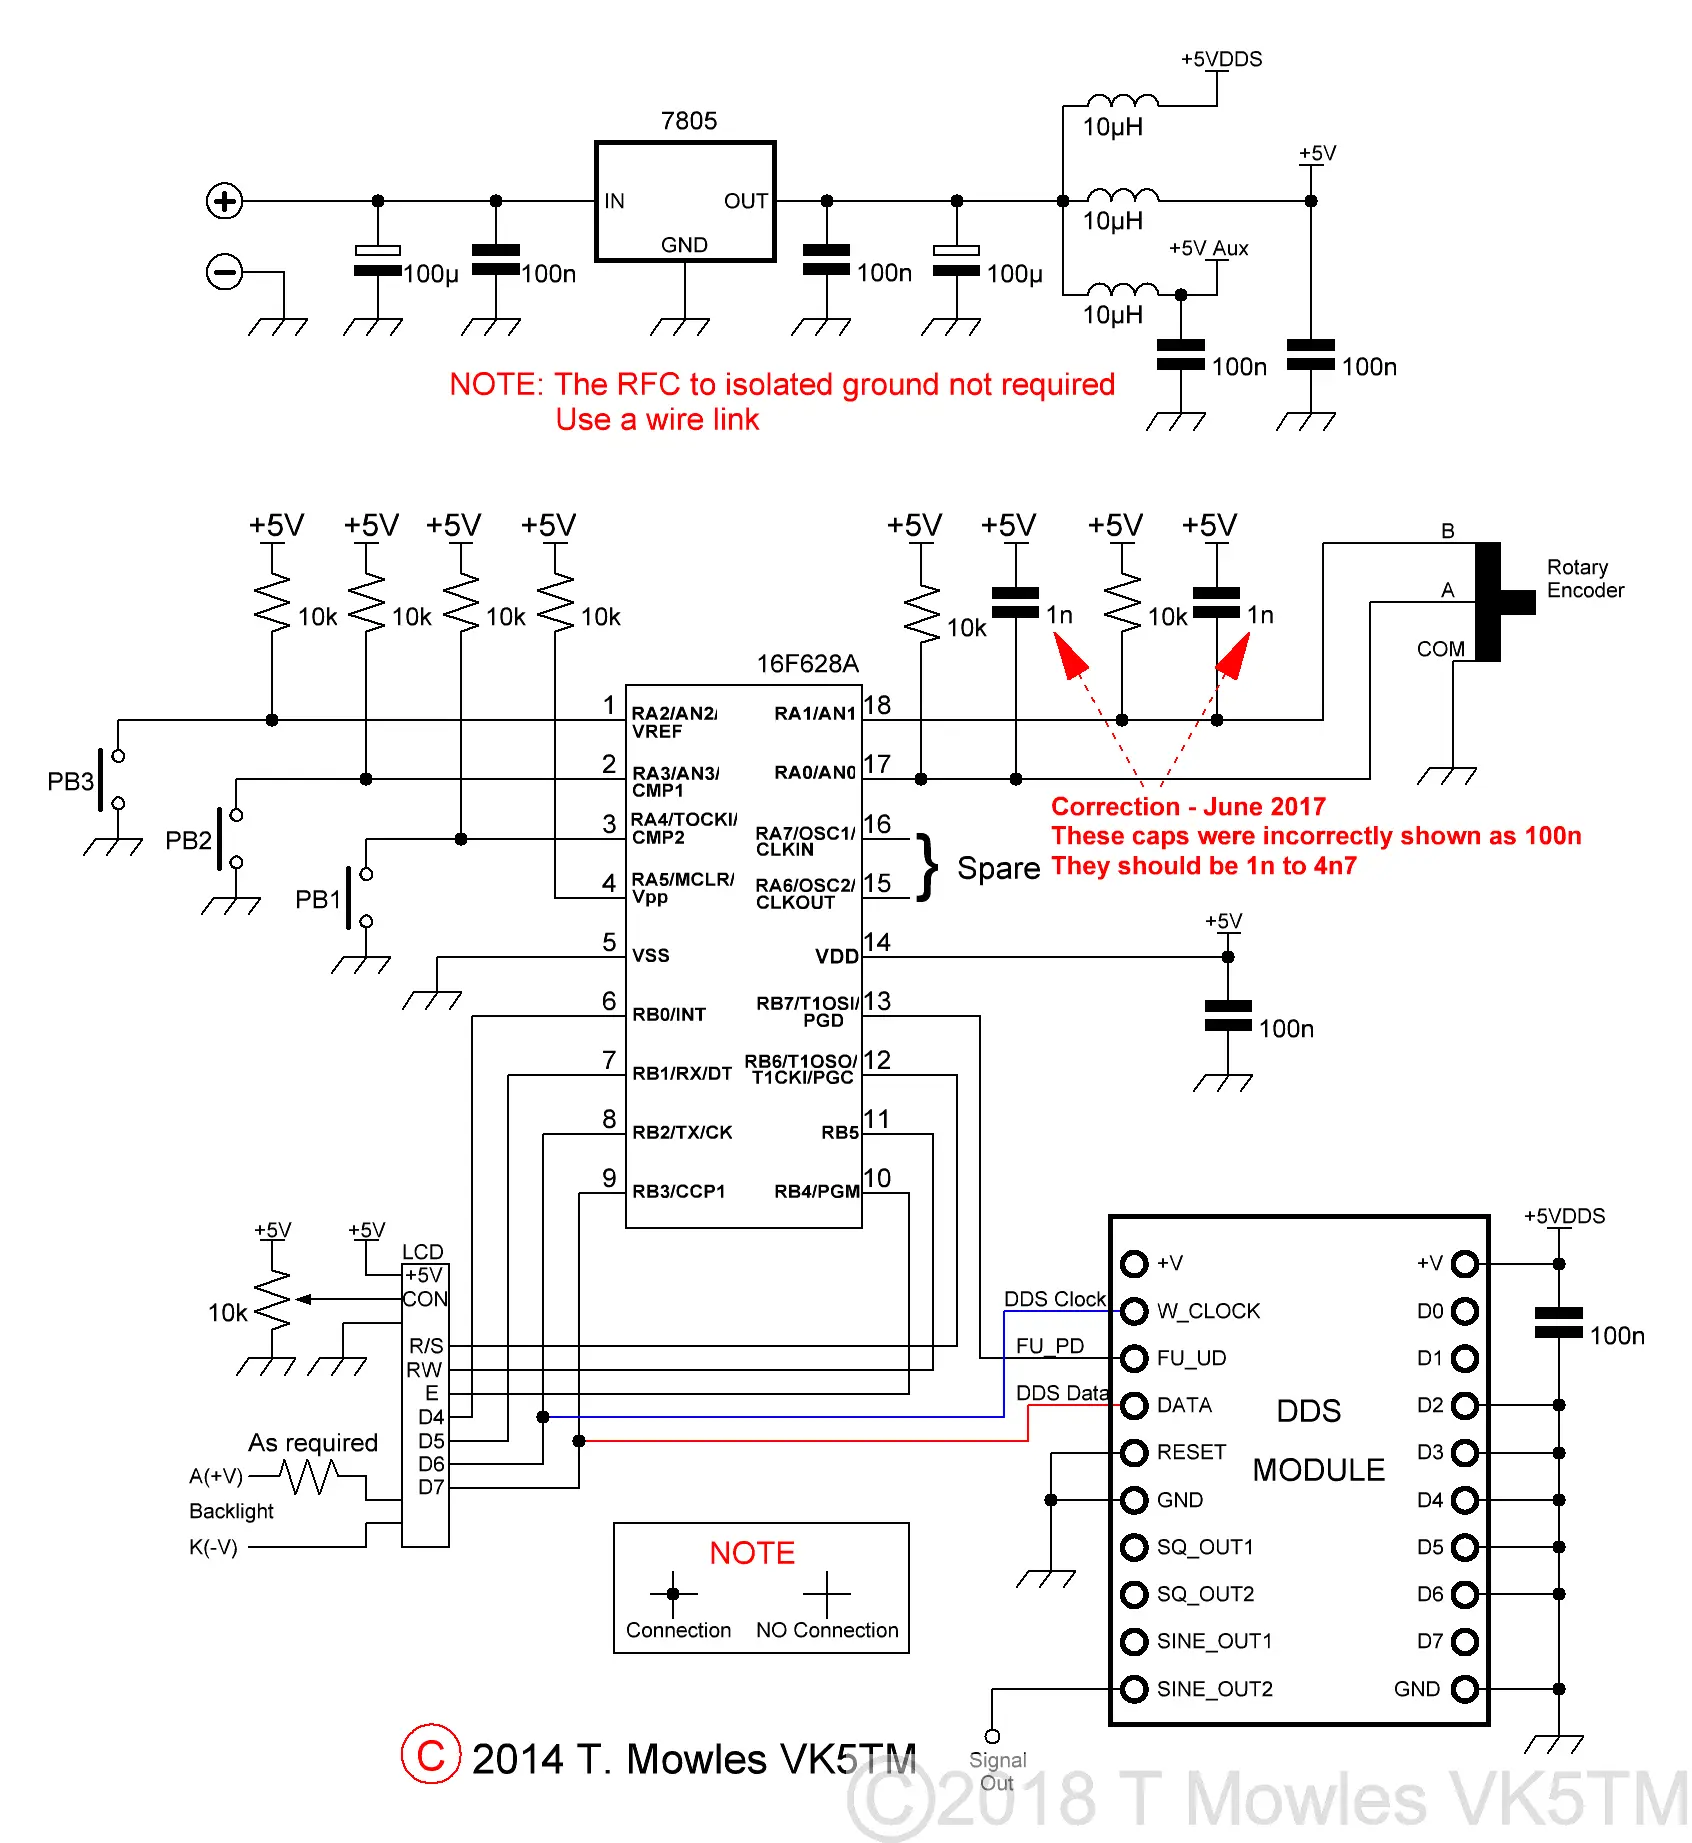 Modified DDS schematic